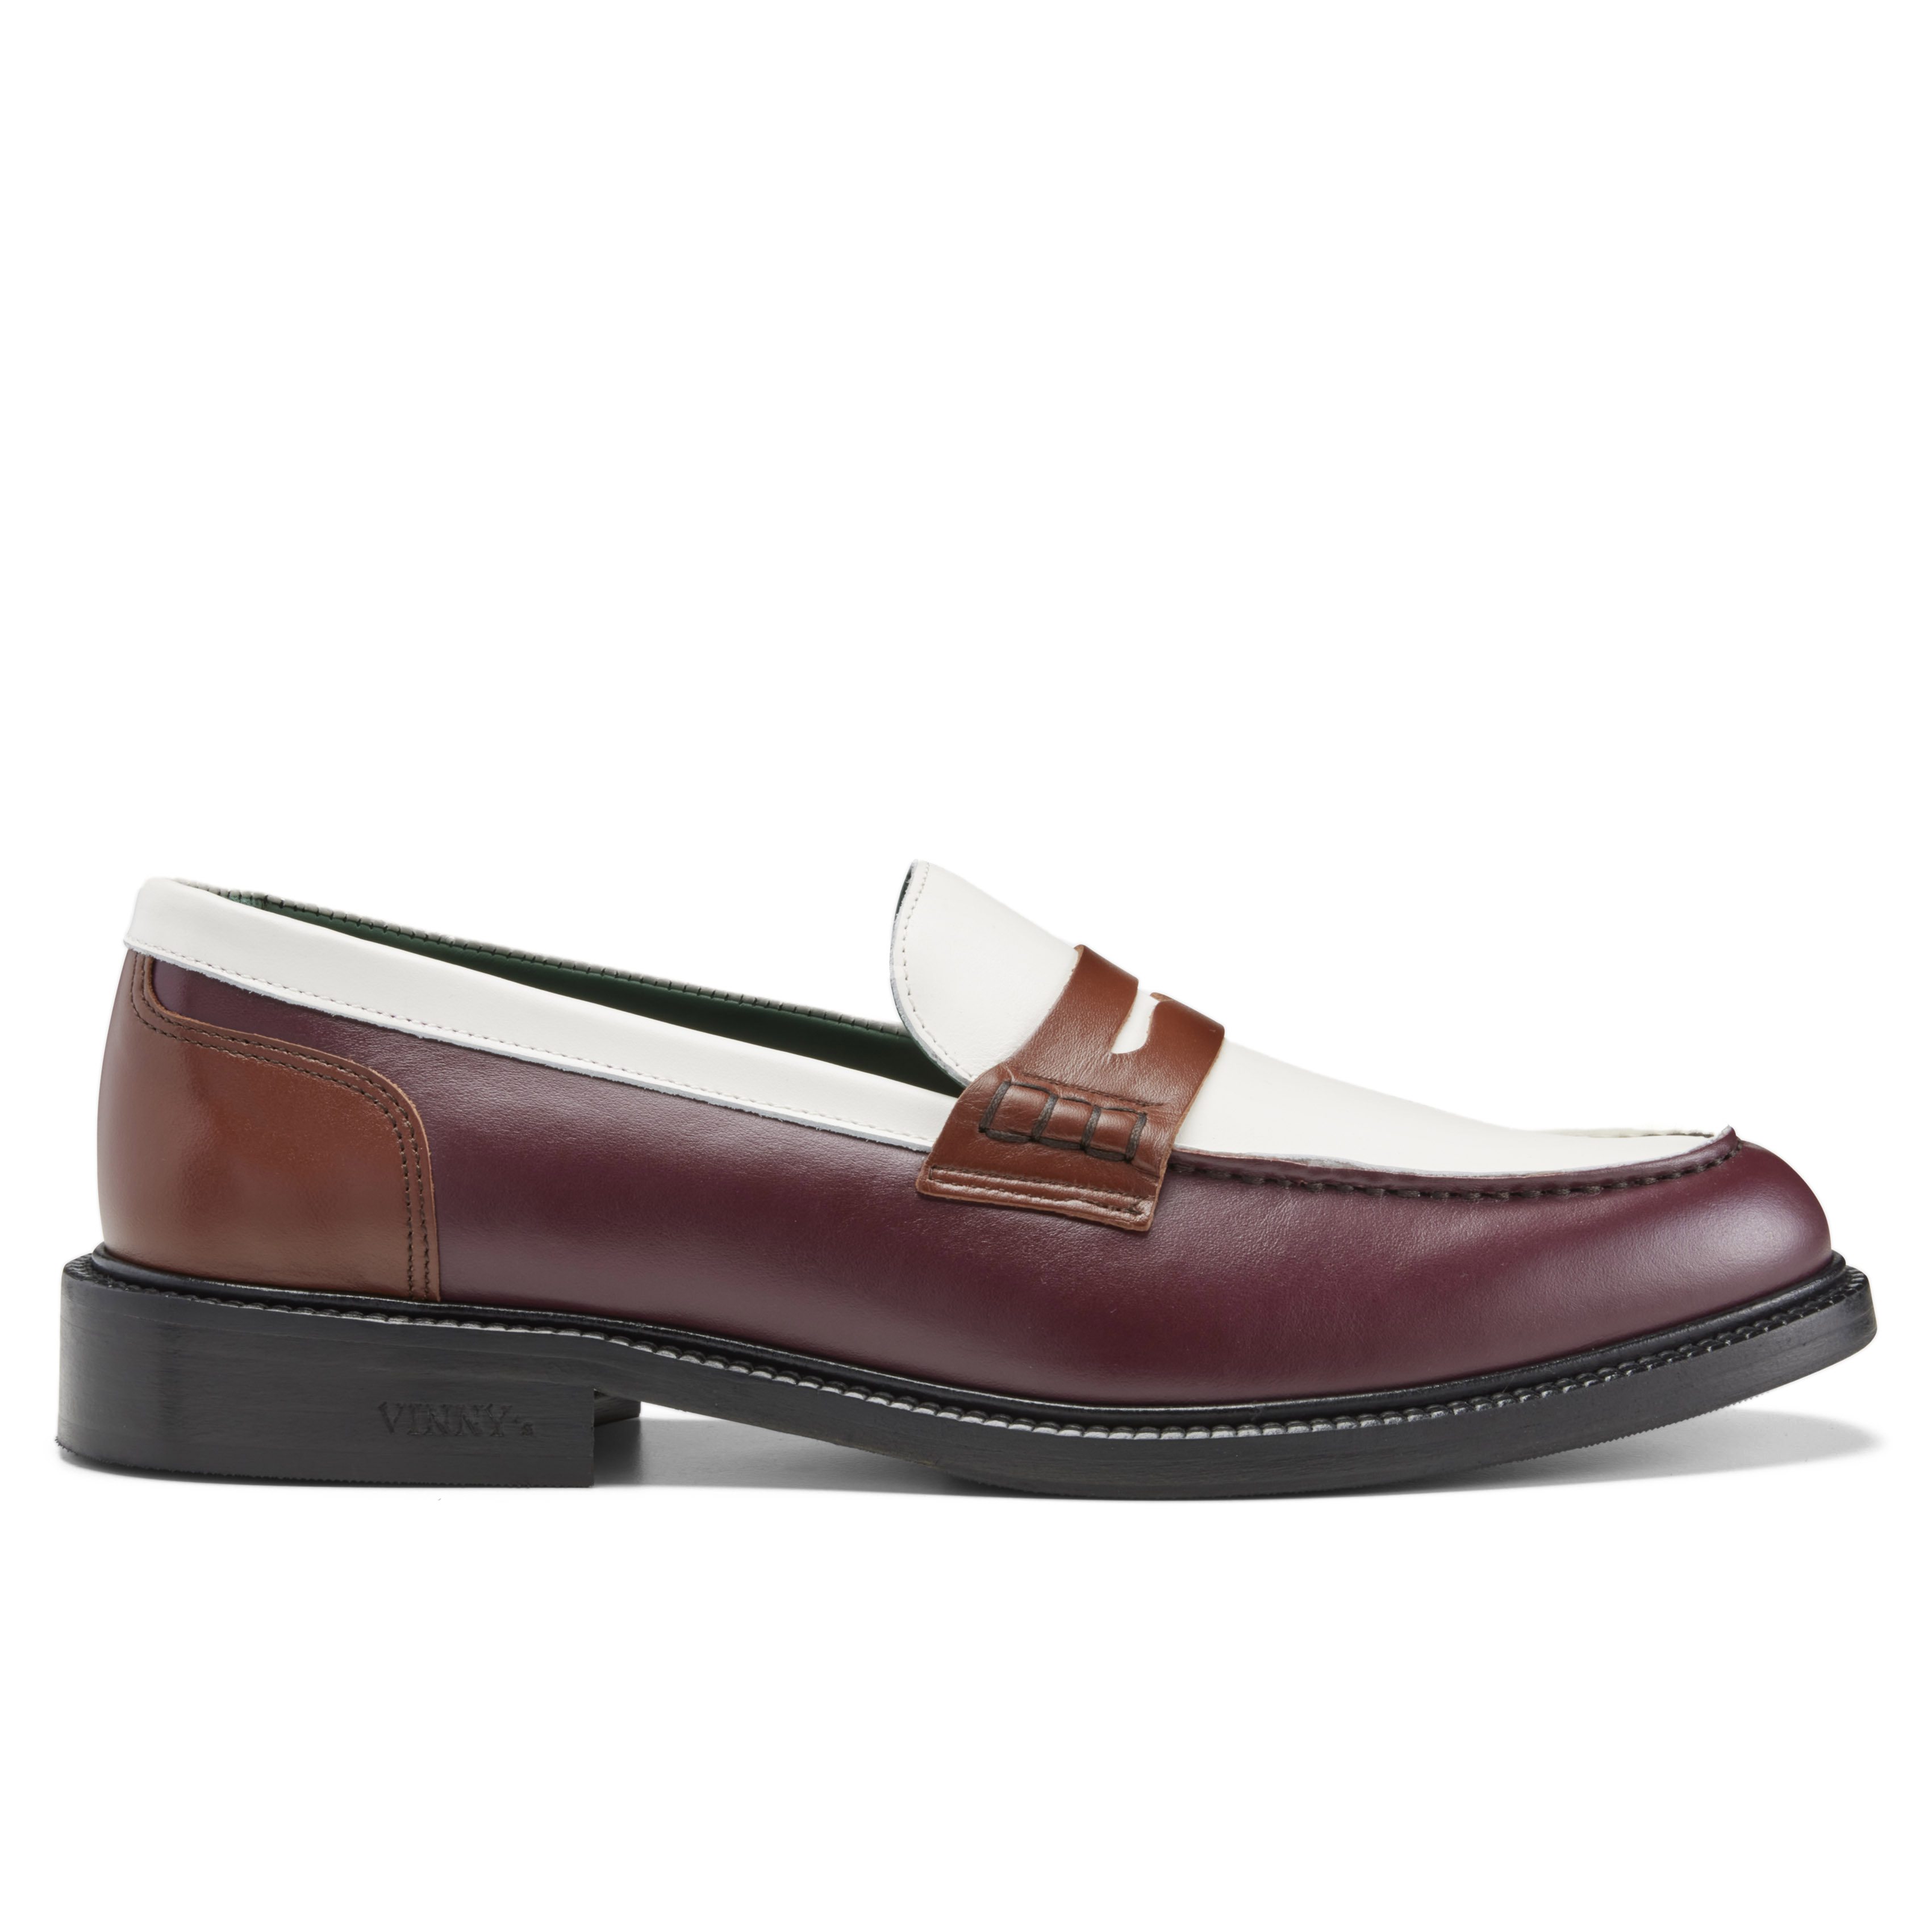 Townee Penny Loafer